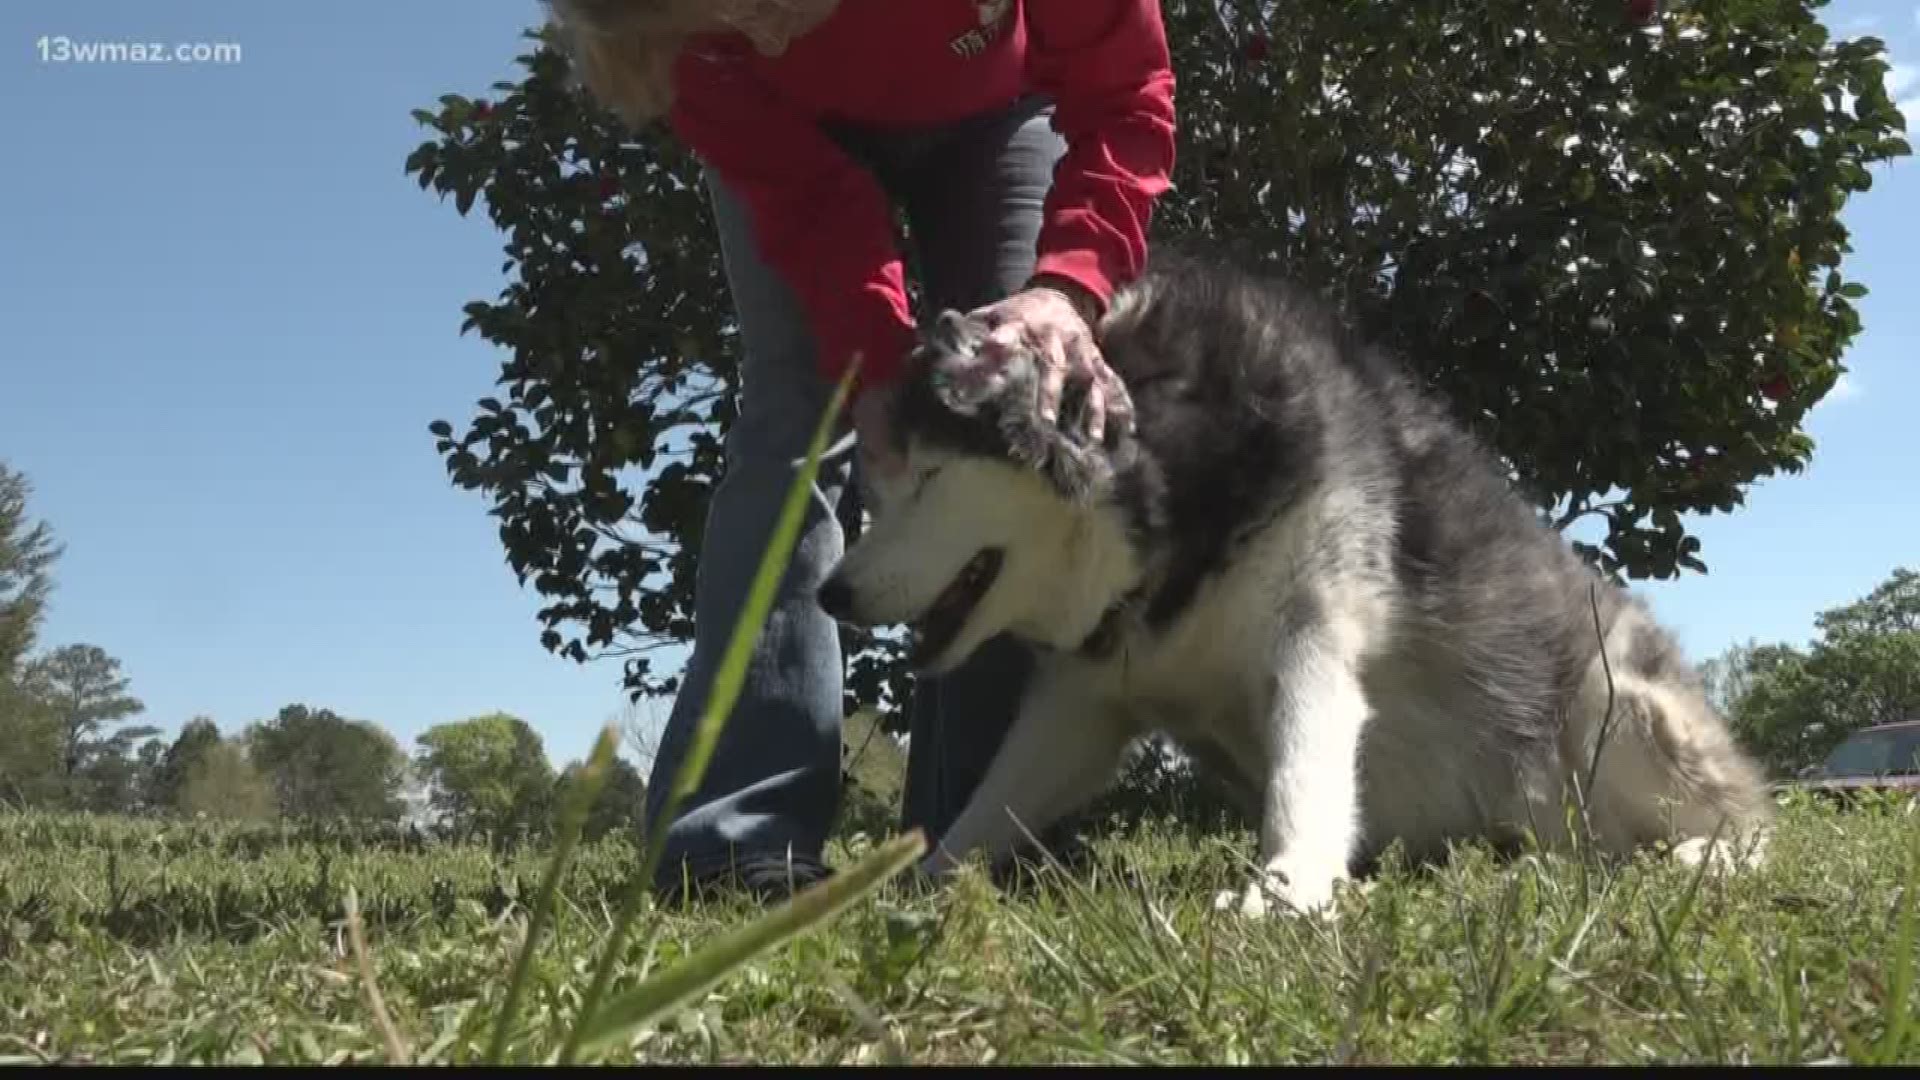 The city of Forsyth is working on expanding their park near downtown. The first step is a new dog park. Ensley Nichols tells us what one Forsyth dog owner thinks about the new spot for their canine friends to socialize.